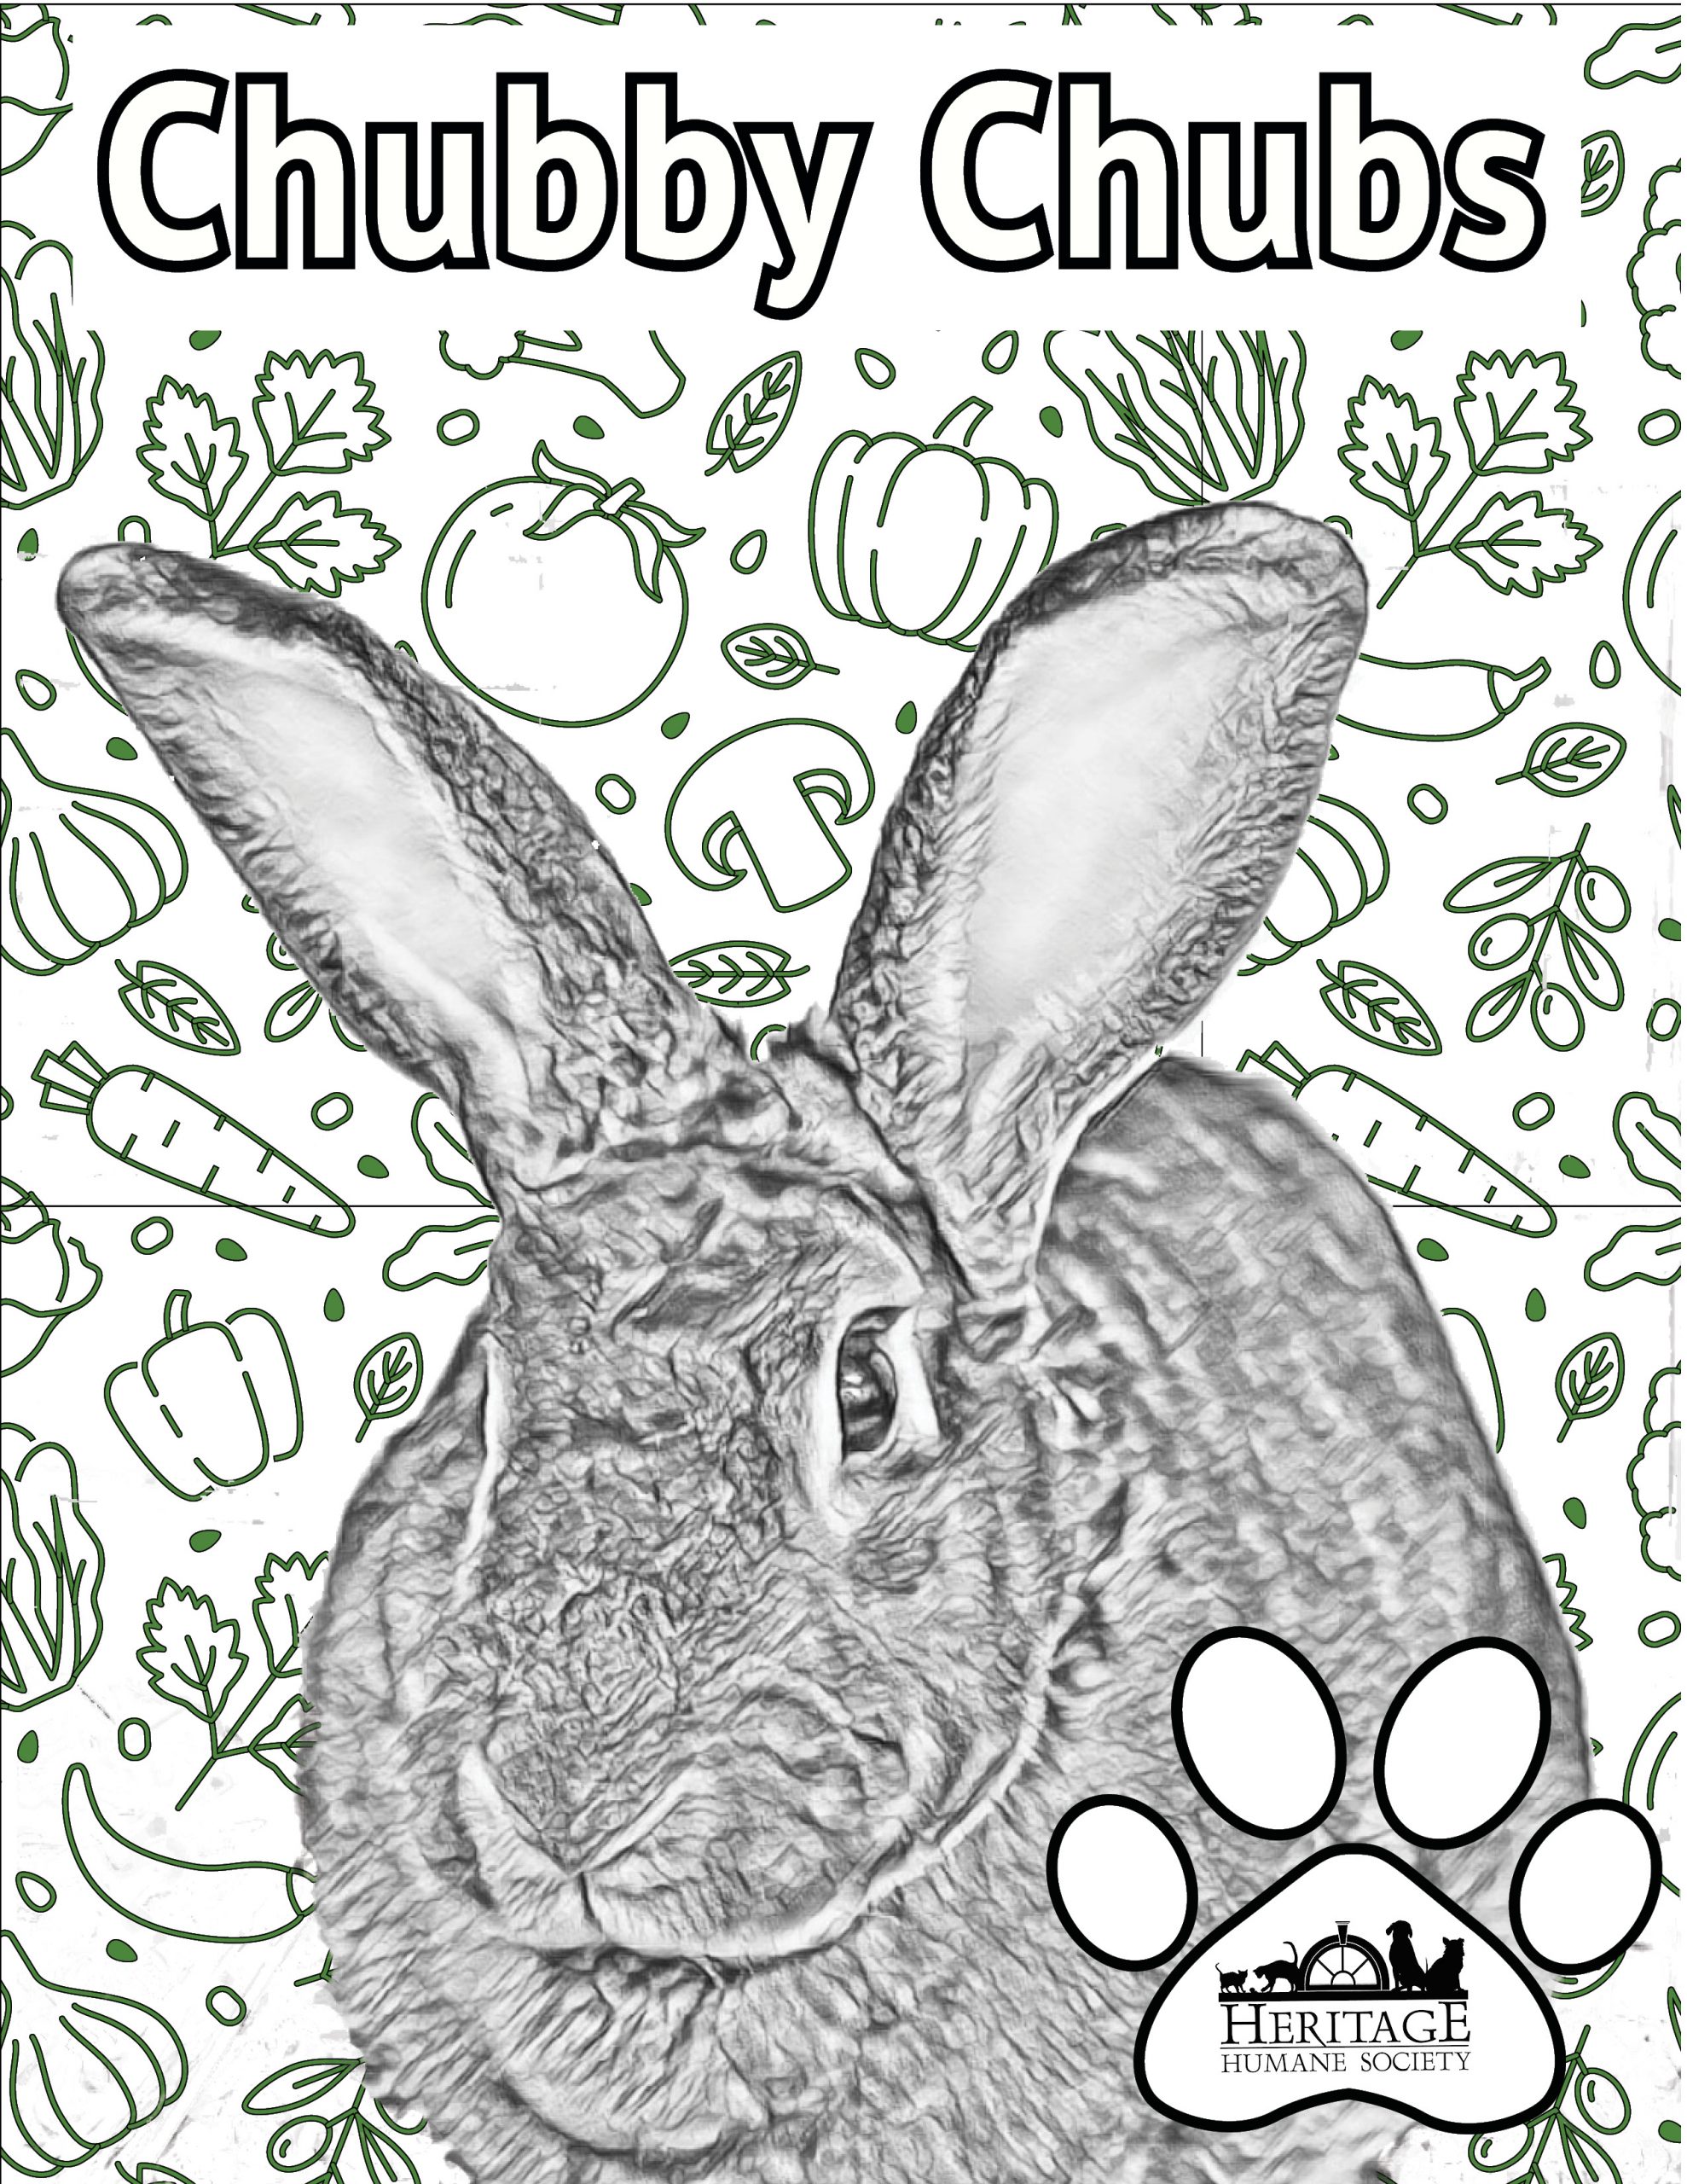 Coloring sheets featuring adoptable pets